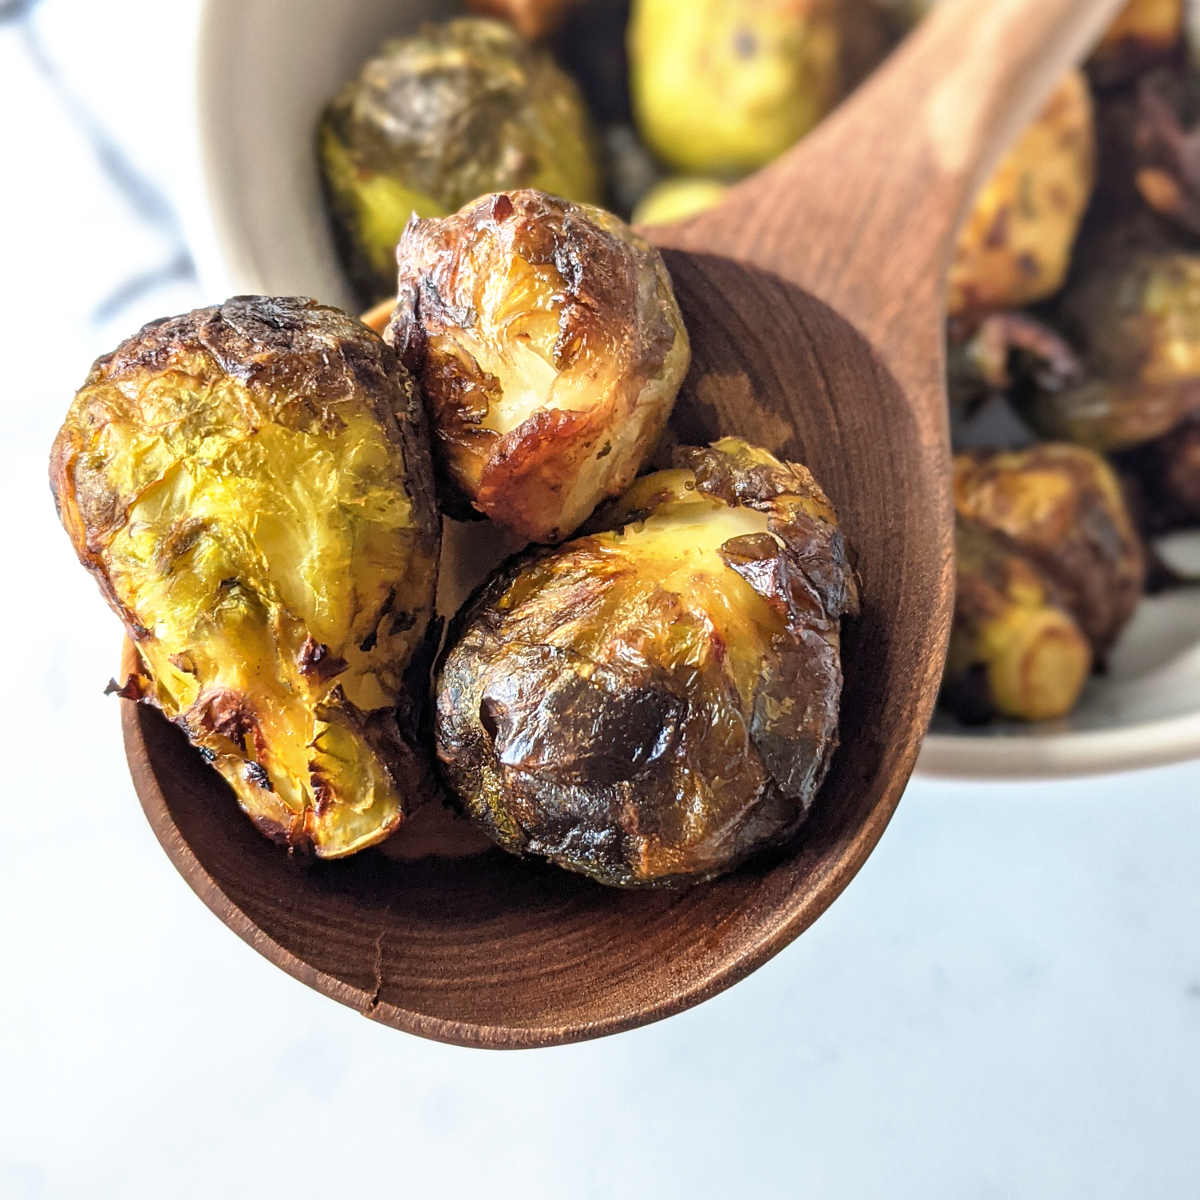 Wooden spoon holding a few roasted brussels sprouts.